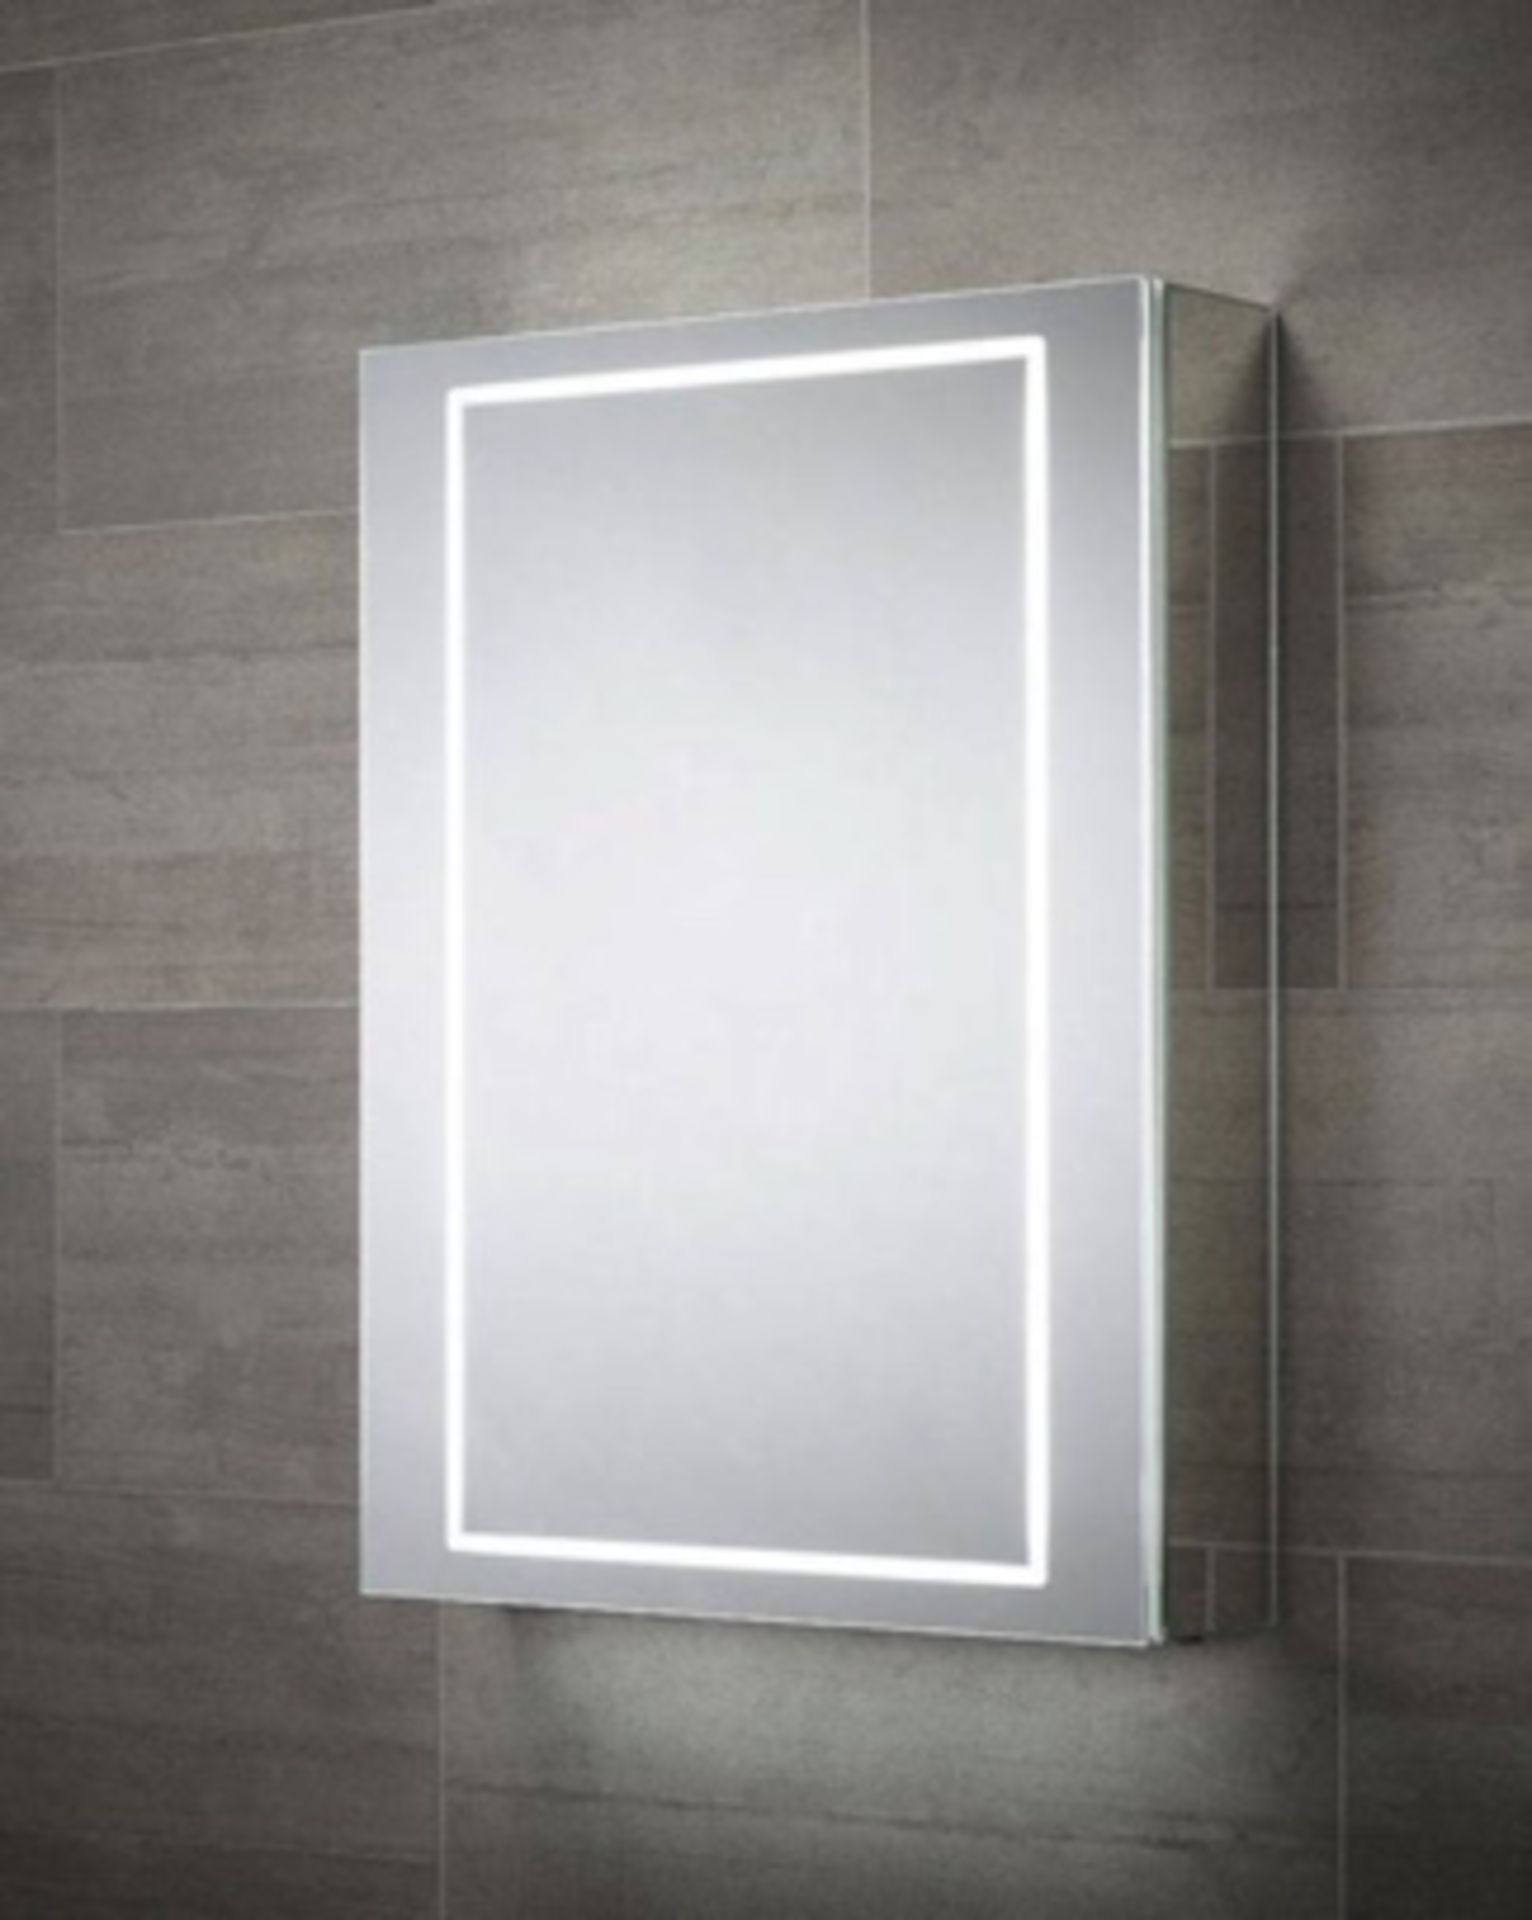 Brand New Boxed Sensio Sonnet Single Door LED Mirror Cabinet 700x500x138 mm RRP £558 **NO VAT** - Image 2 of 2